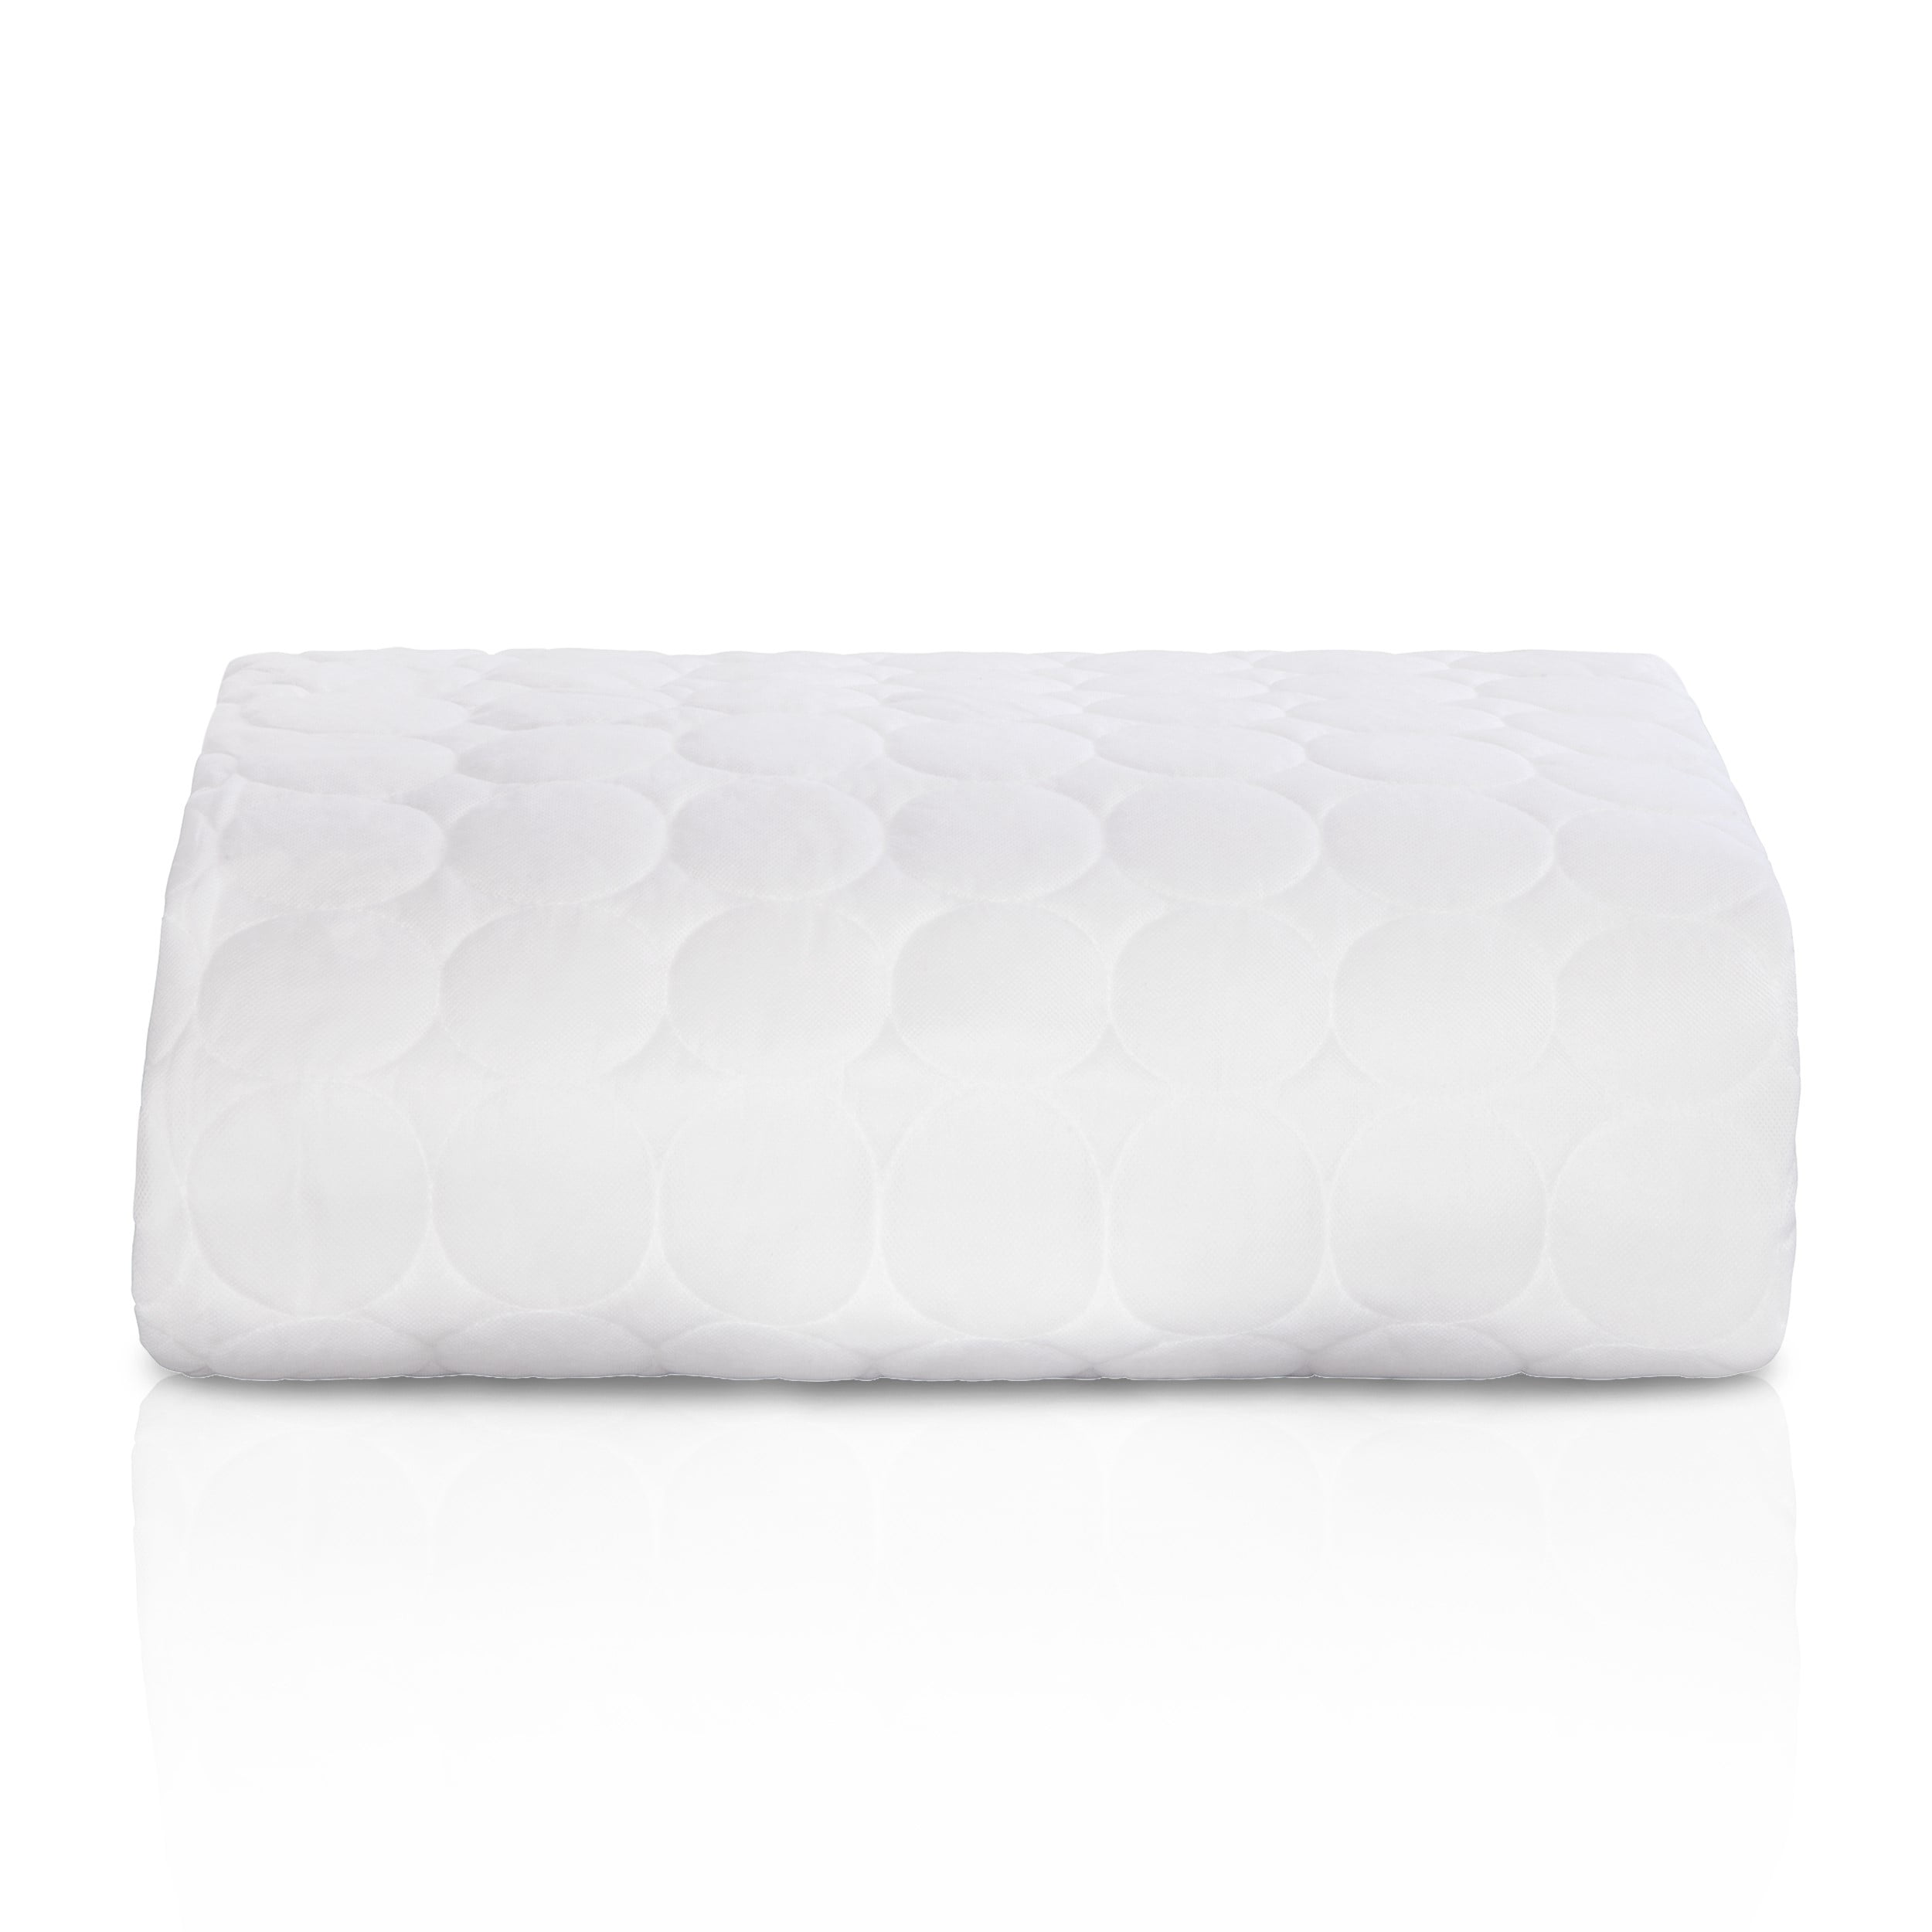 Details about   Plush Mattress Pad Hypoallergenic Polyester Quilted Cover Fitted Deep Pocket New 